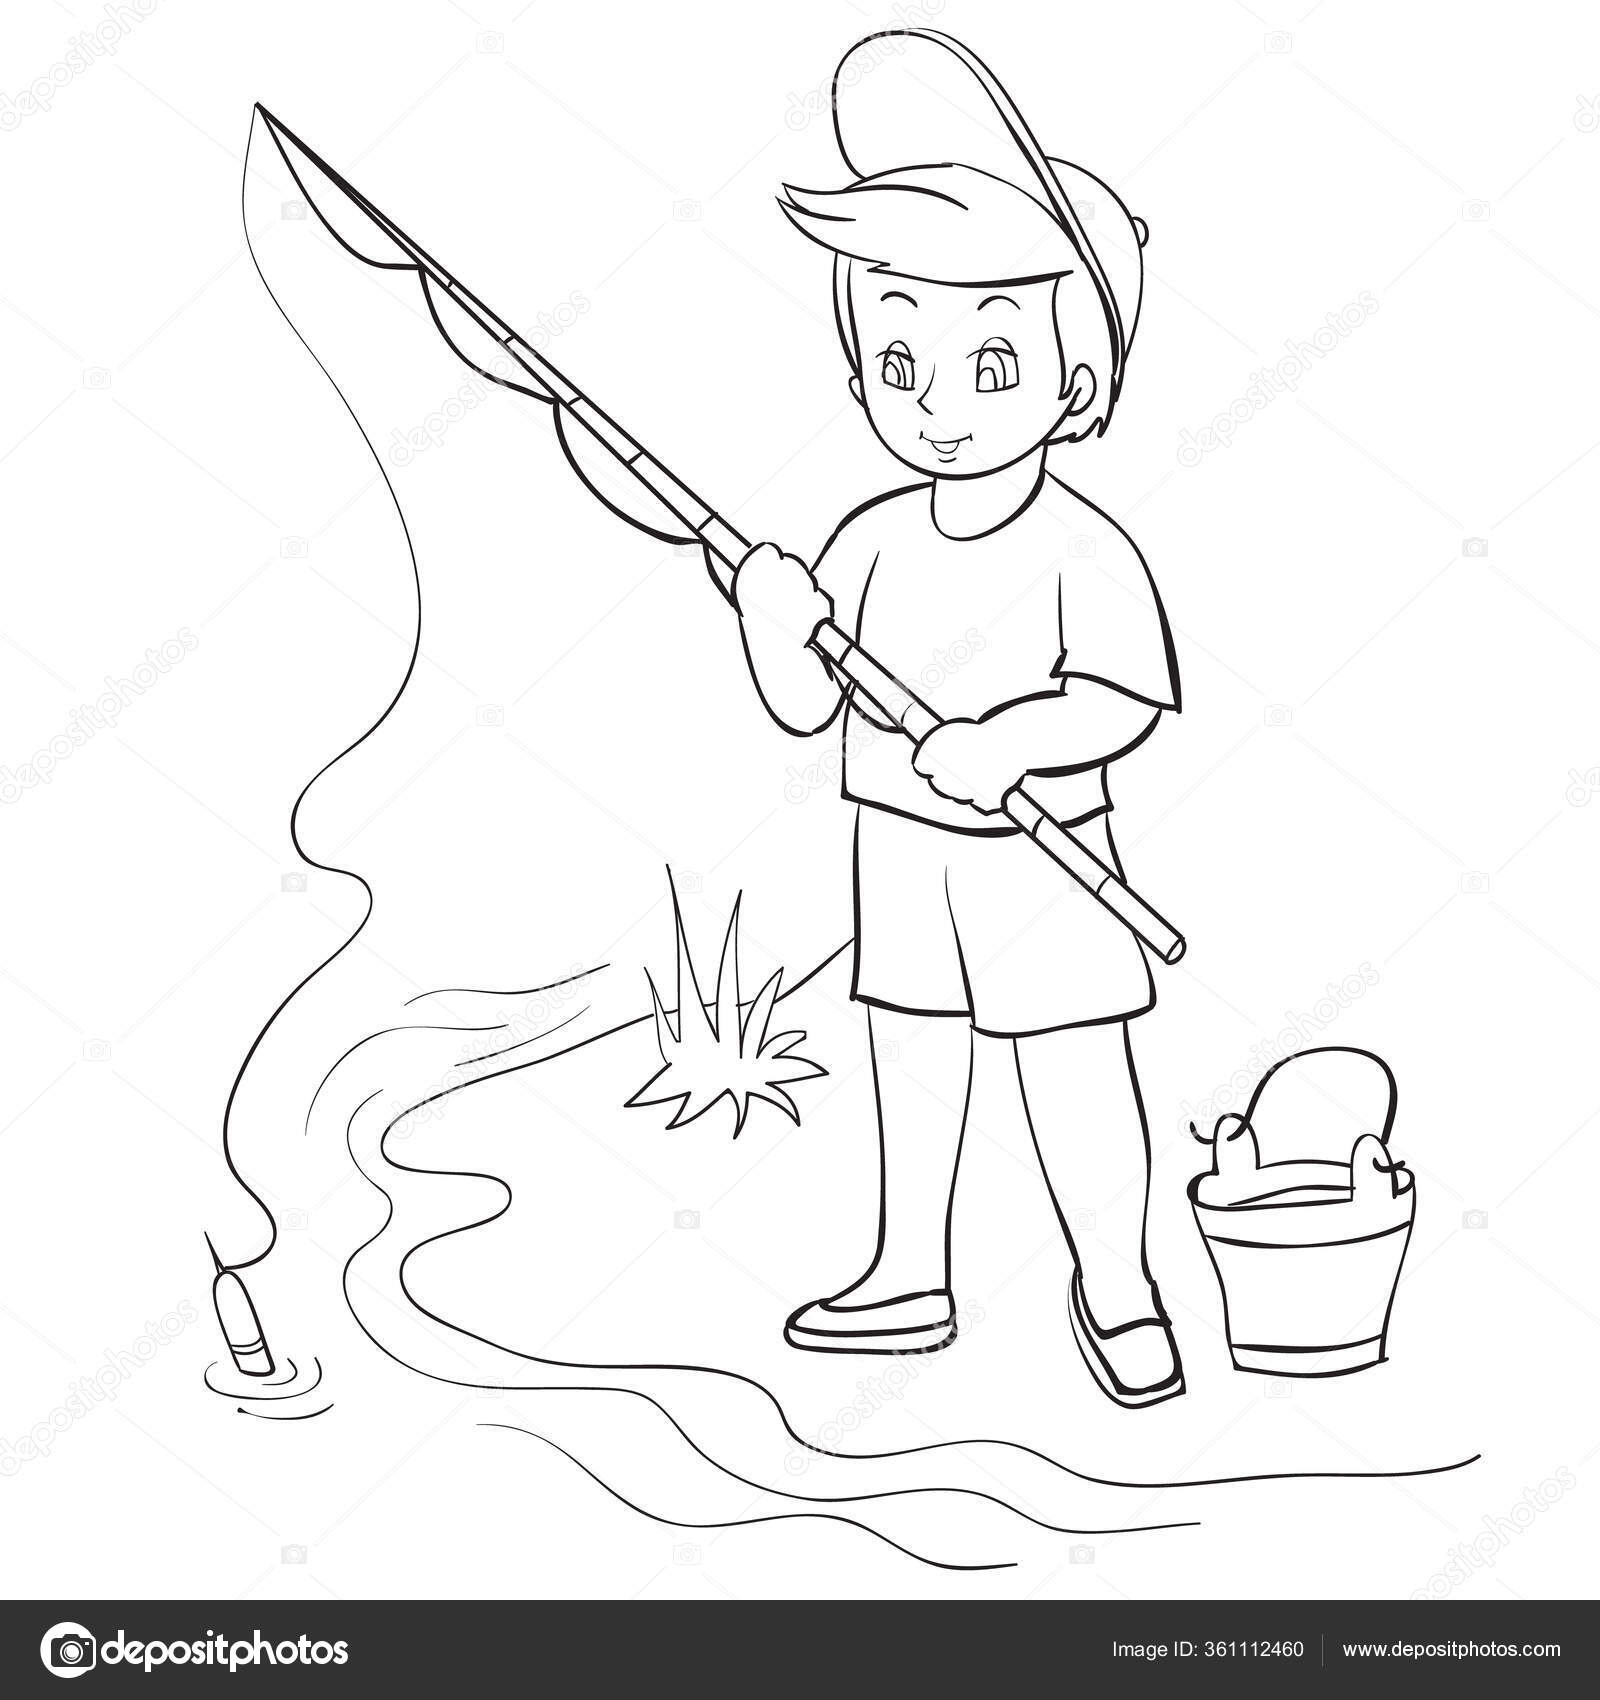 A boy stands on the riverbank with a bucket and holds a fishing rod in his